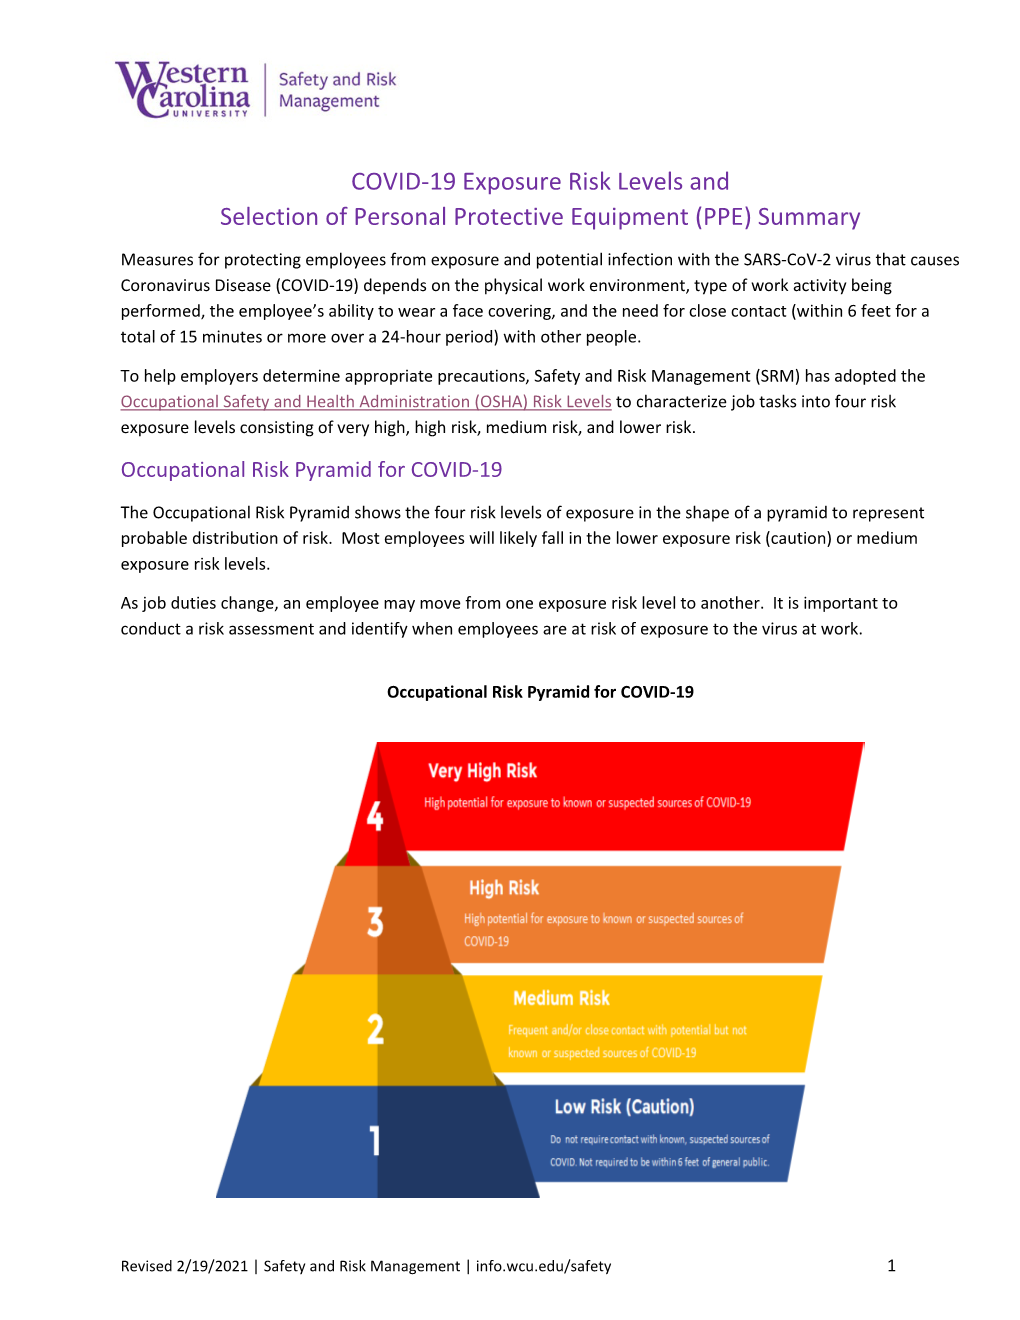 COVID-19 Exposure Risk Levels and Selection of Personal Protective Equipment (PPE) Summary